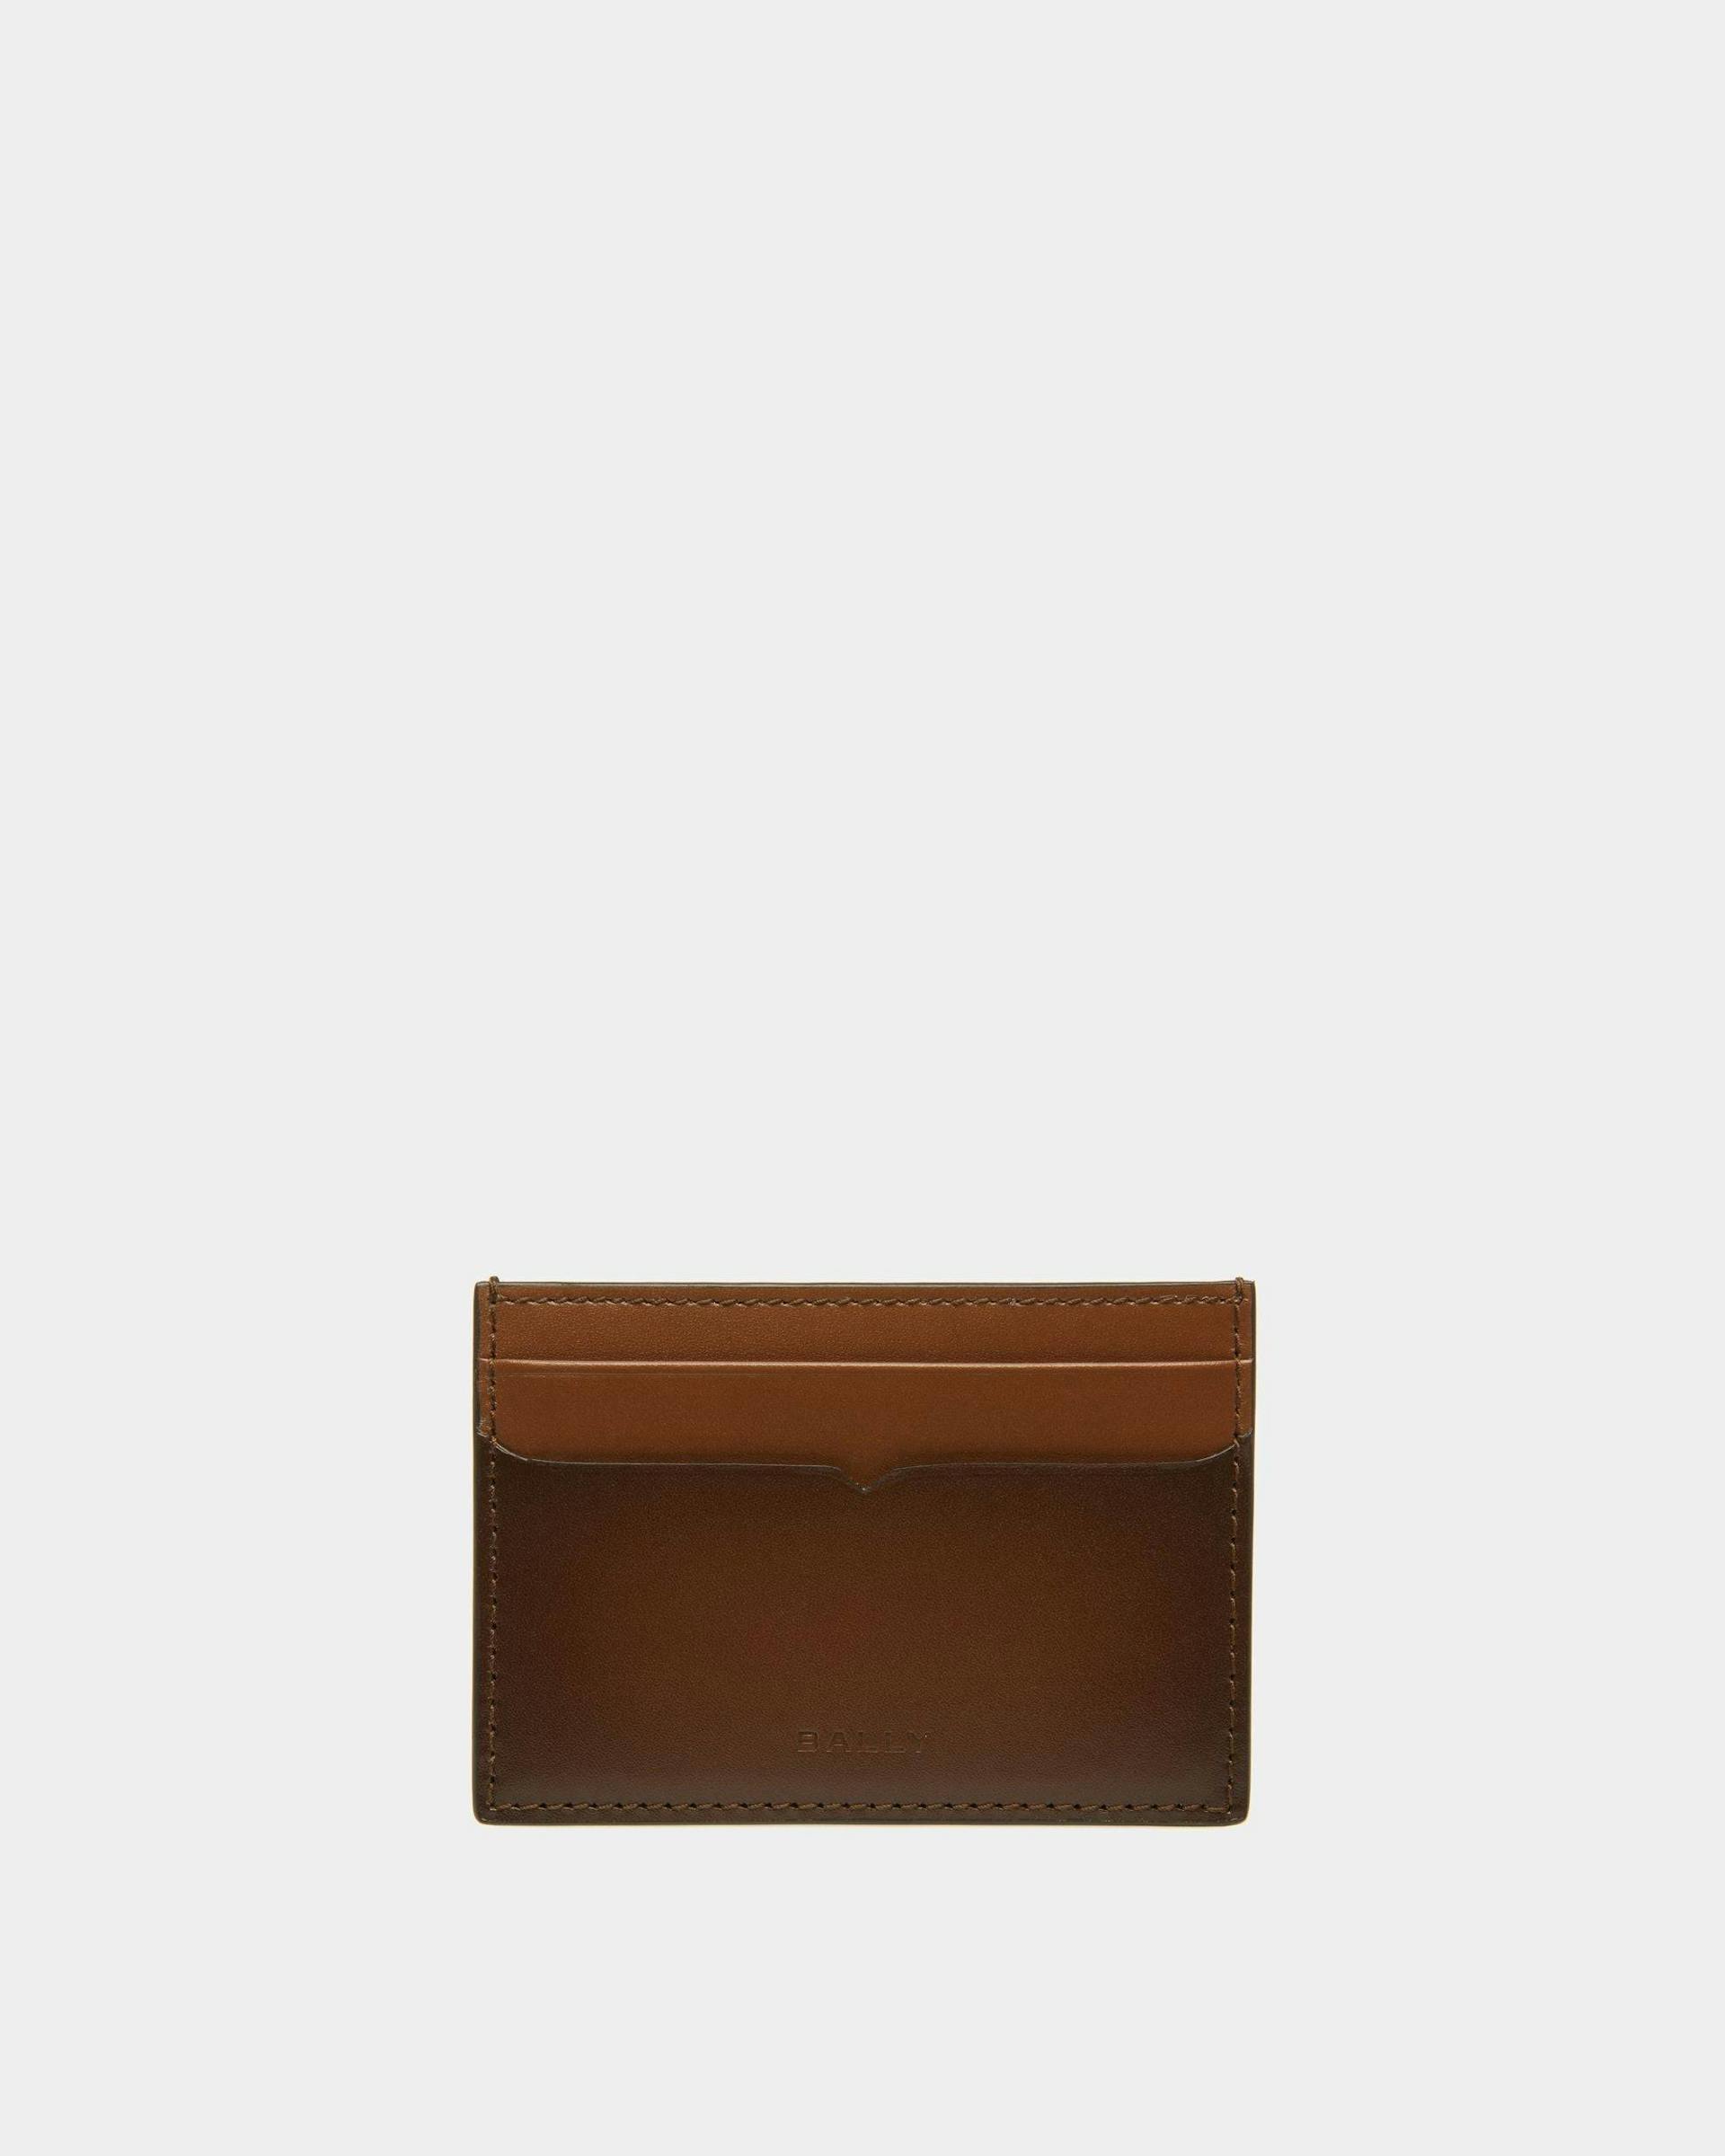 Speciale Card Holder - Bally